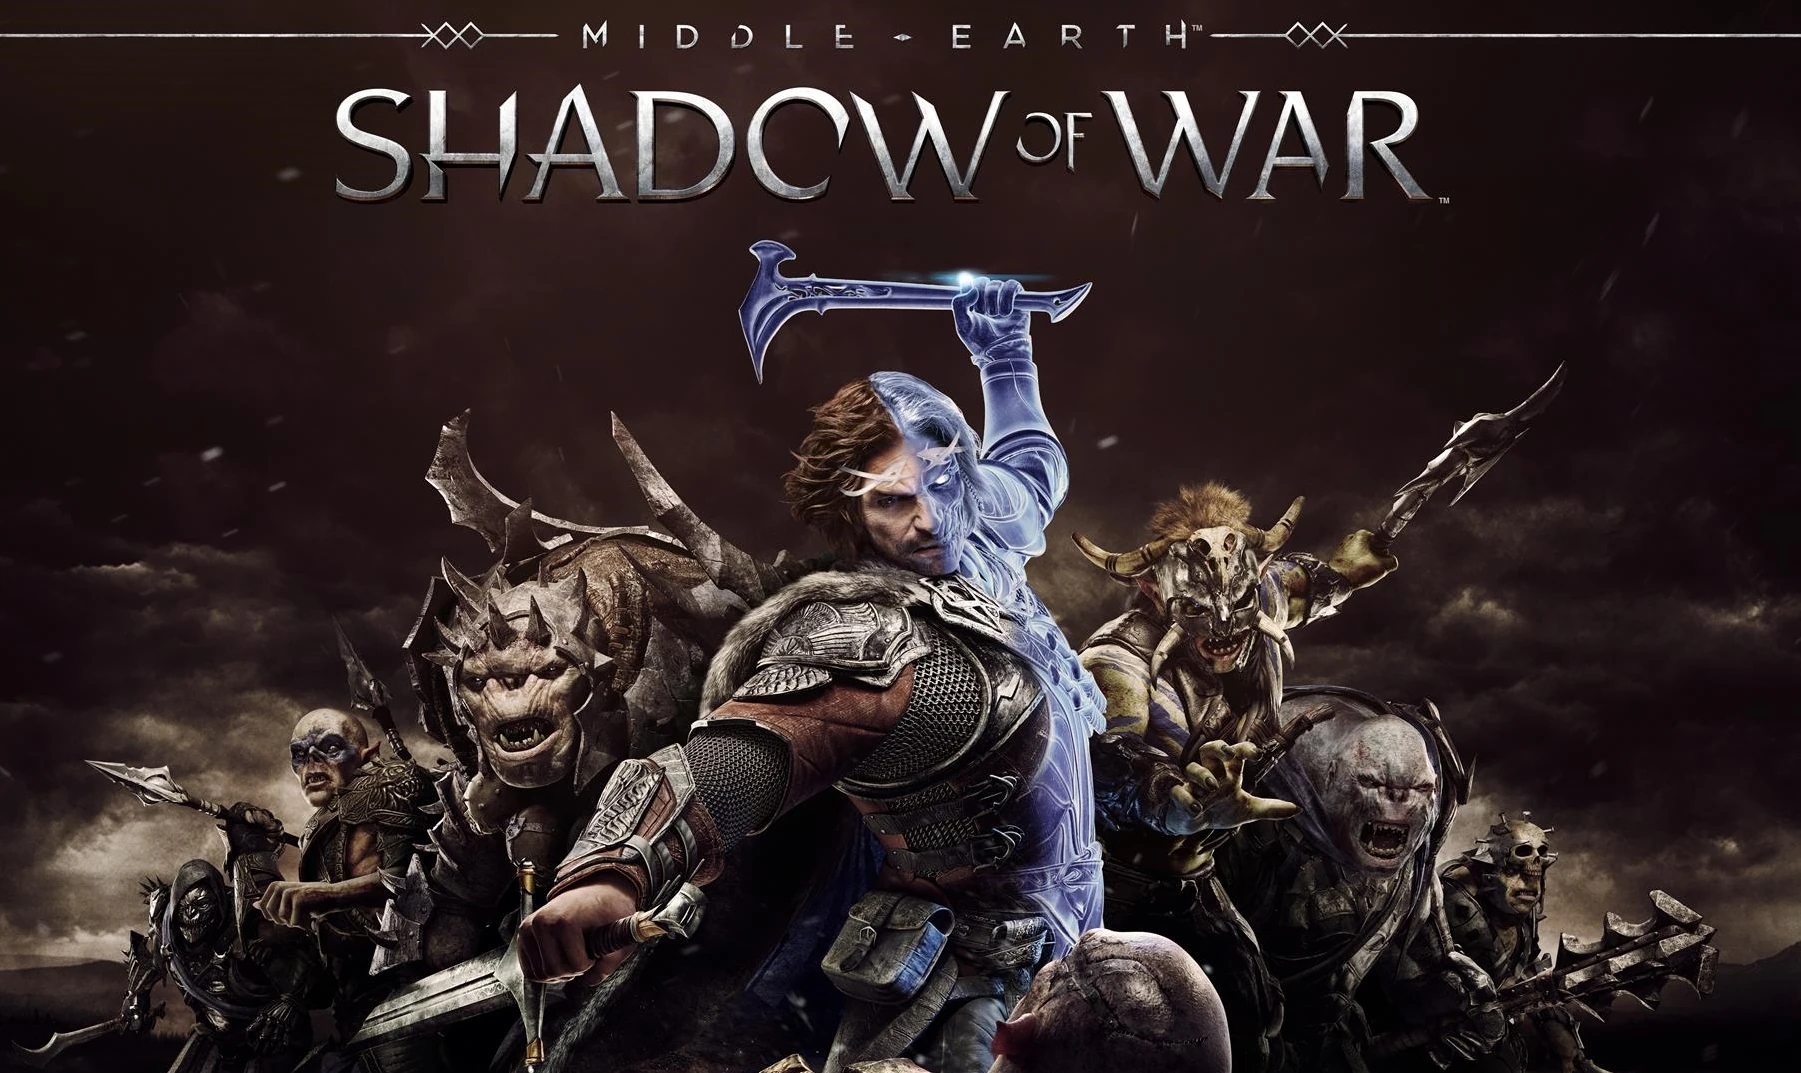 Middle-earth: Shadow of war image